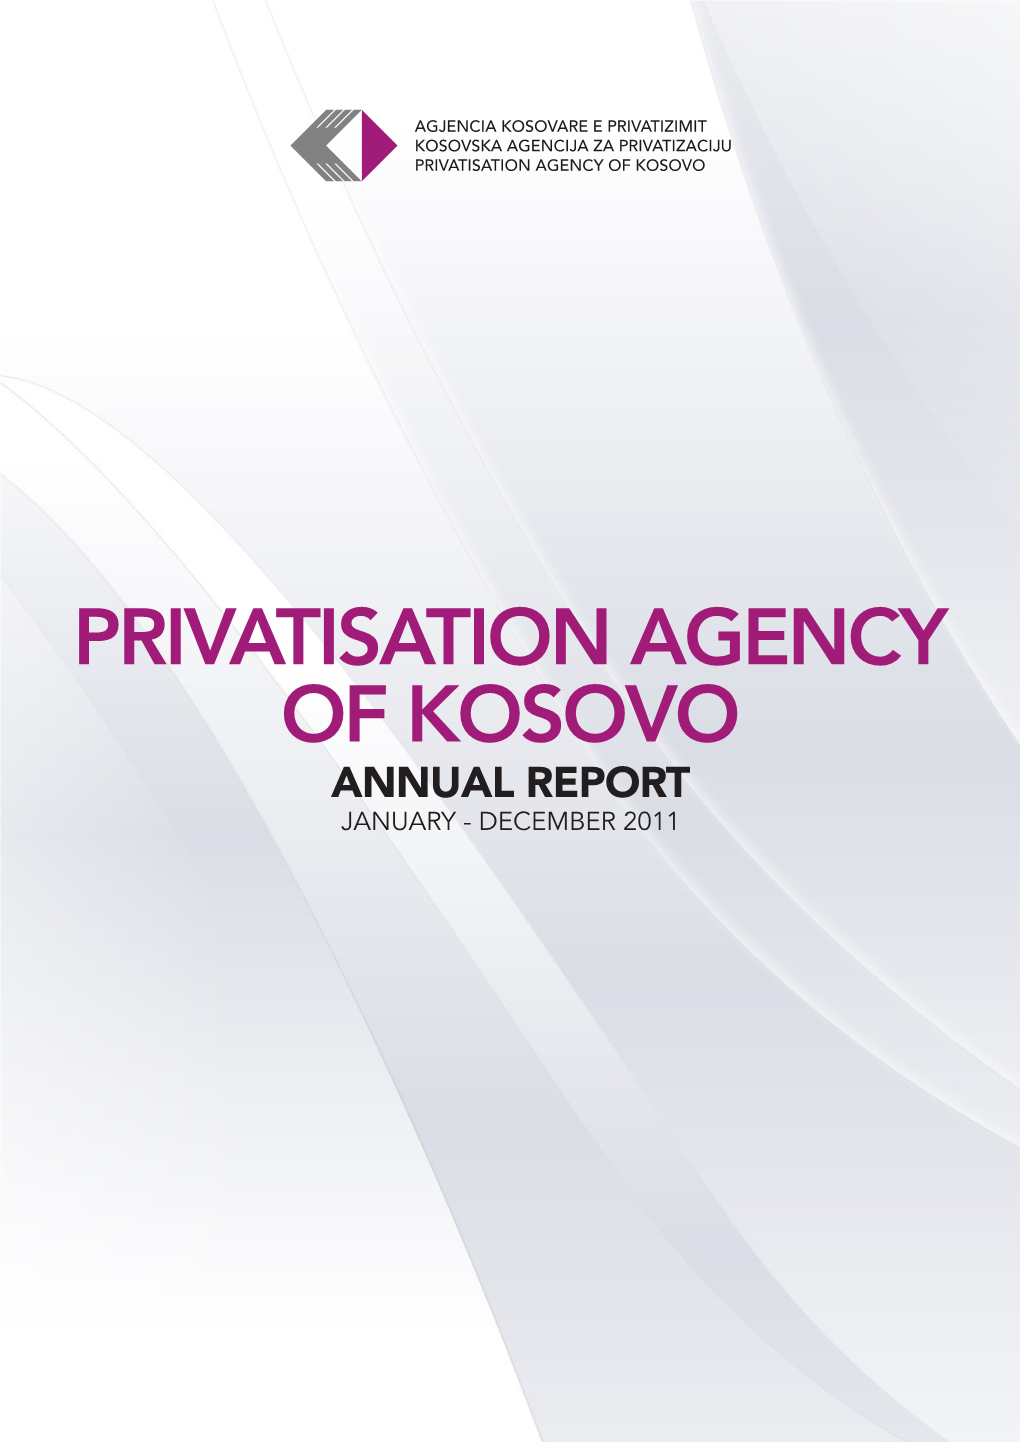 Privatisation Agency of Kosovo Annual Report January - December 2011